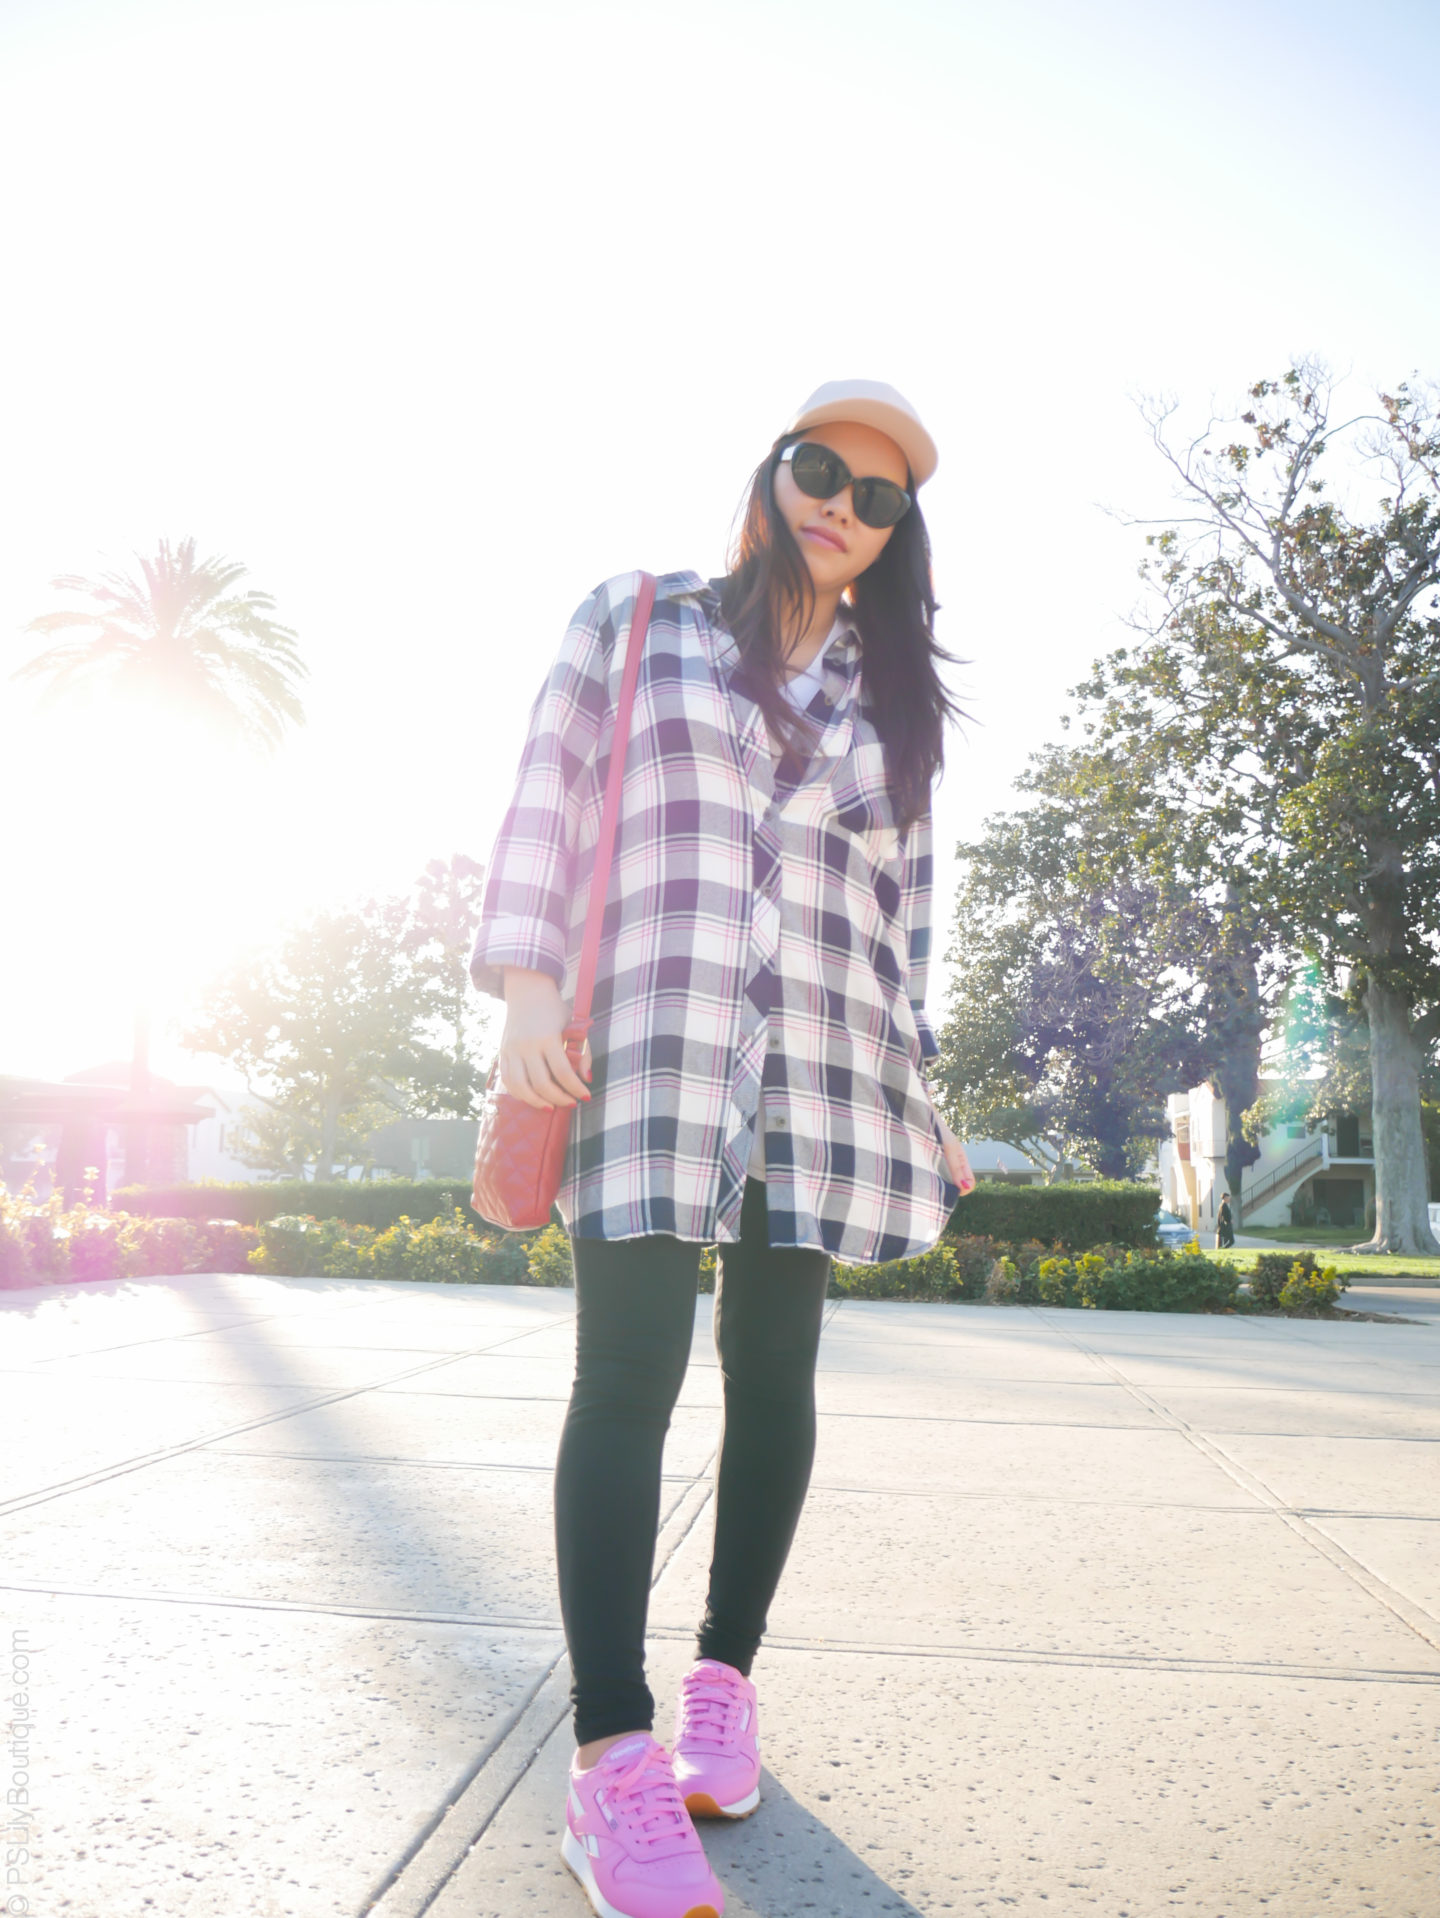 Gone Plaid... – PSLily Boutique | A Los Angeles Based Lifestyle and Fashion Blog by Lily, Instagram: @pslilyboutique, Pinterest, Los Angeles fashion blogger, top fashion blog, best fashion blog, fashion & personal style blog, travel blog, LA fashion blogger, winter 2018 outfit ideas, KUT from the Kloth blue and white plai shirt, forever 21 black leggings, pink H&M hat, pink reebok classic sneakers shoes, 2.6.18